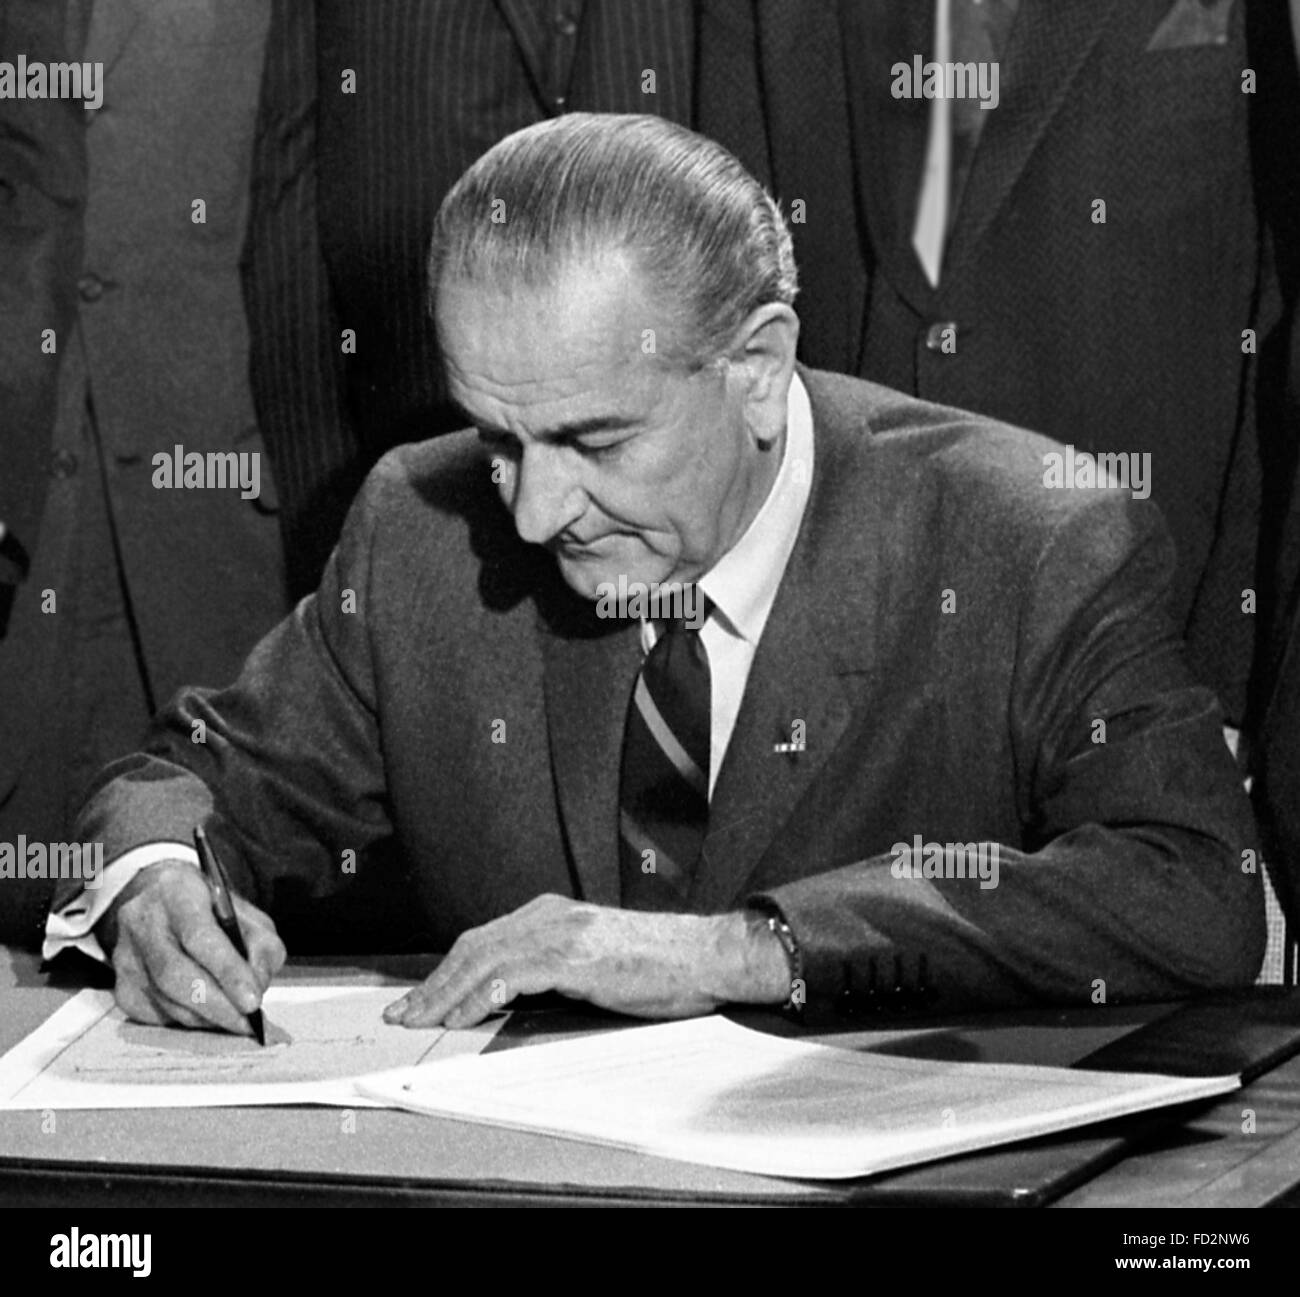 Lyndon B Johnson, the 36th President of the USA, signing the 1968 Civil Rights Act, 11th April 1968. Photo by Warren K Leffler, U.S. News & World Report Magazine. Stock Photo